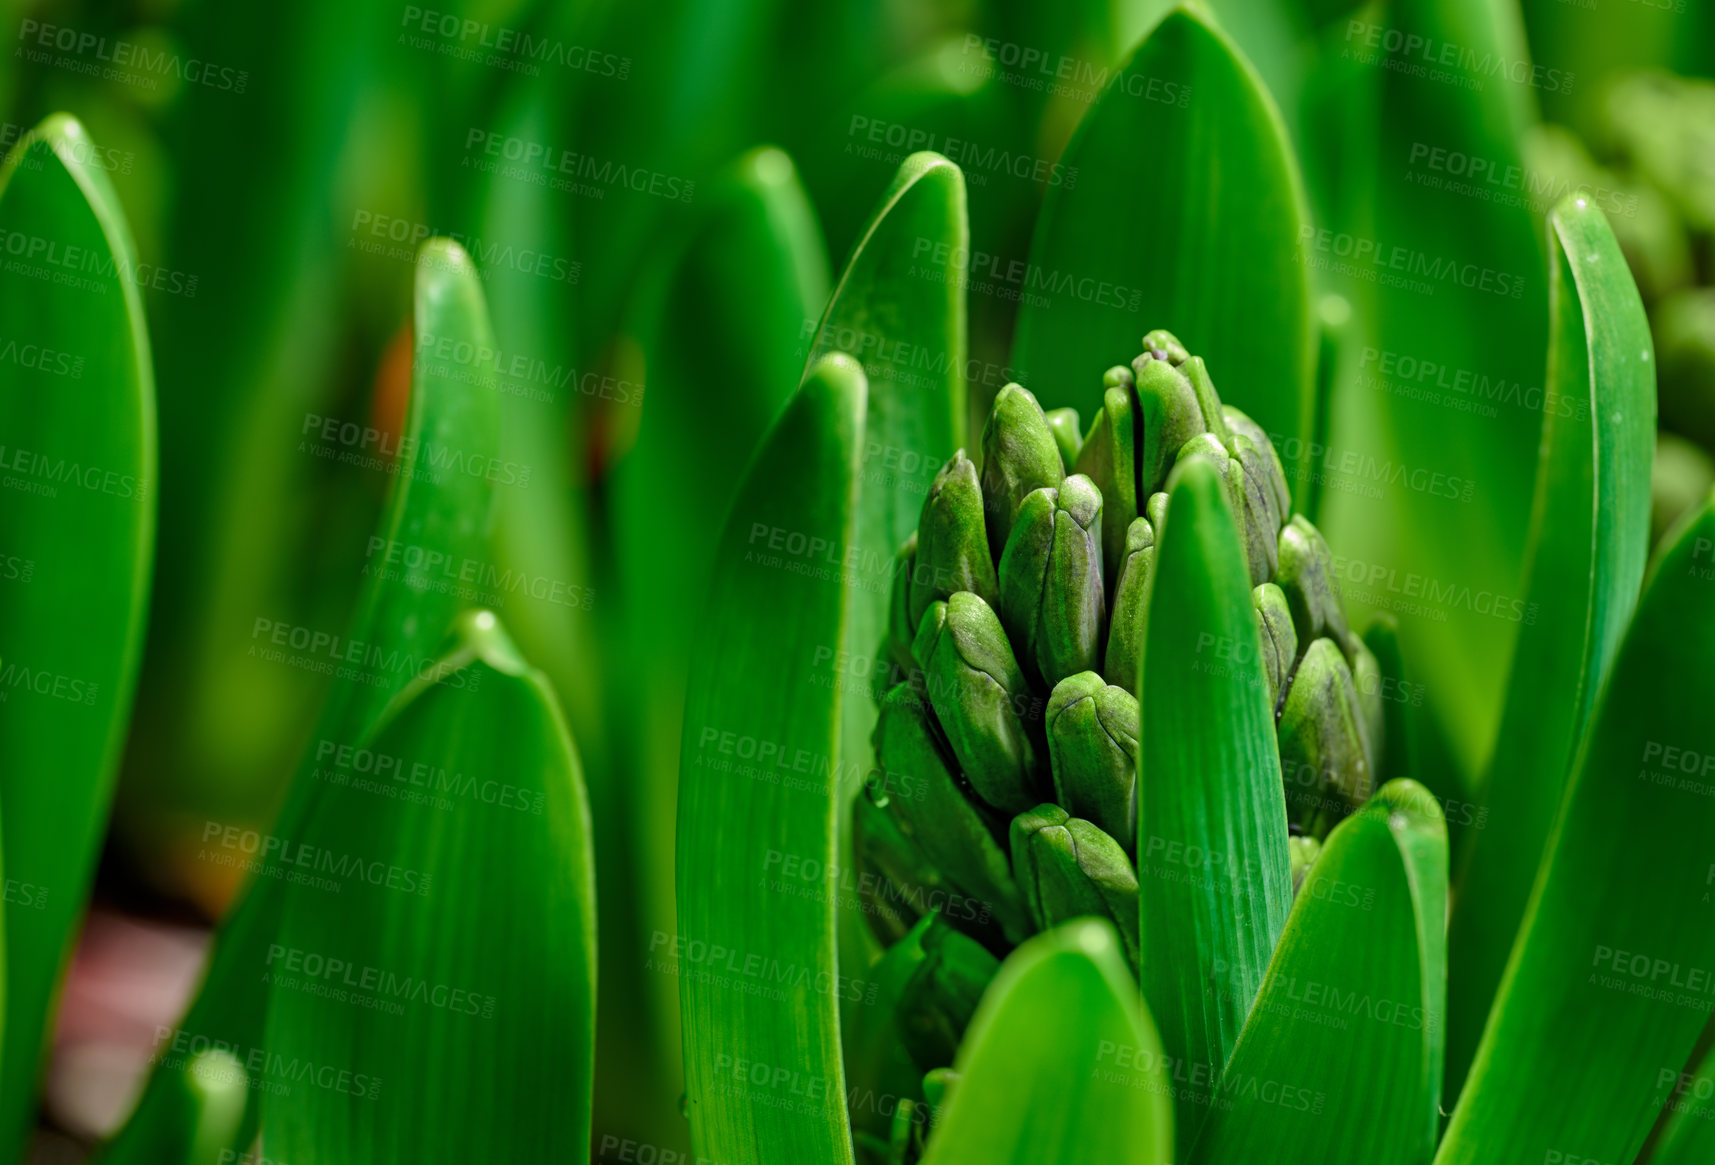 Buy stock photo Closeup of a budding hyacinth flower on a lush green shrub stem, growing in a home garden. Macro view of a hyacinthus plant with vibrant leaves on stalks blooming in a backyard landscaped flowerbed